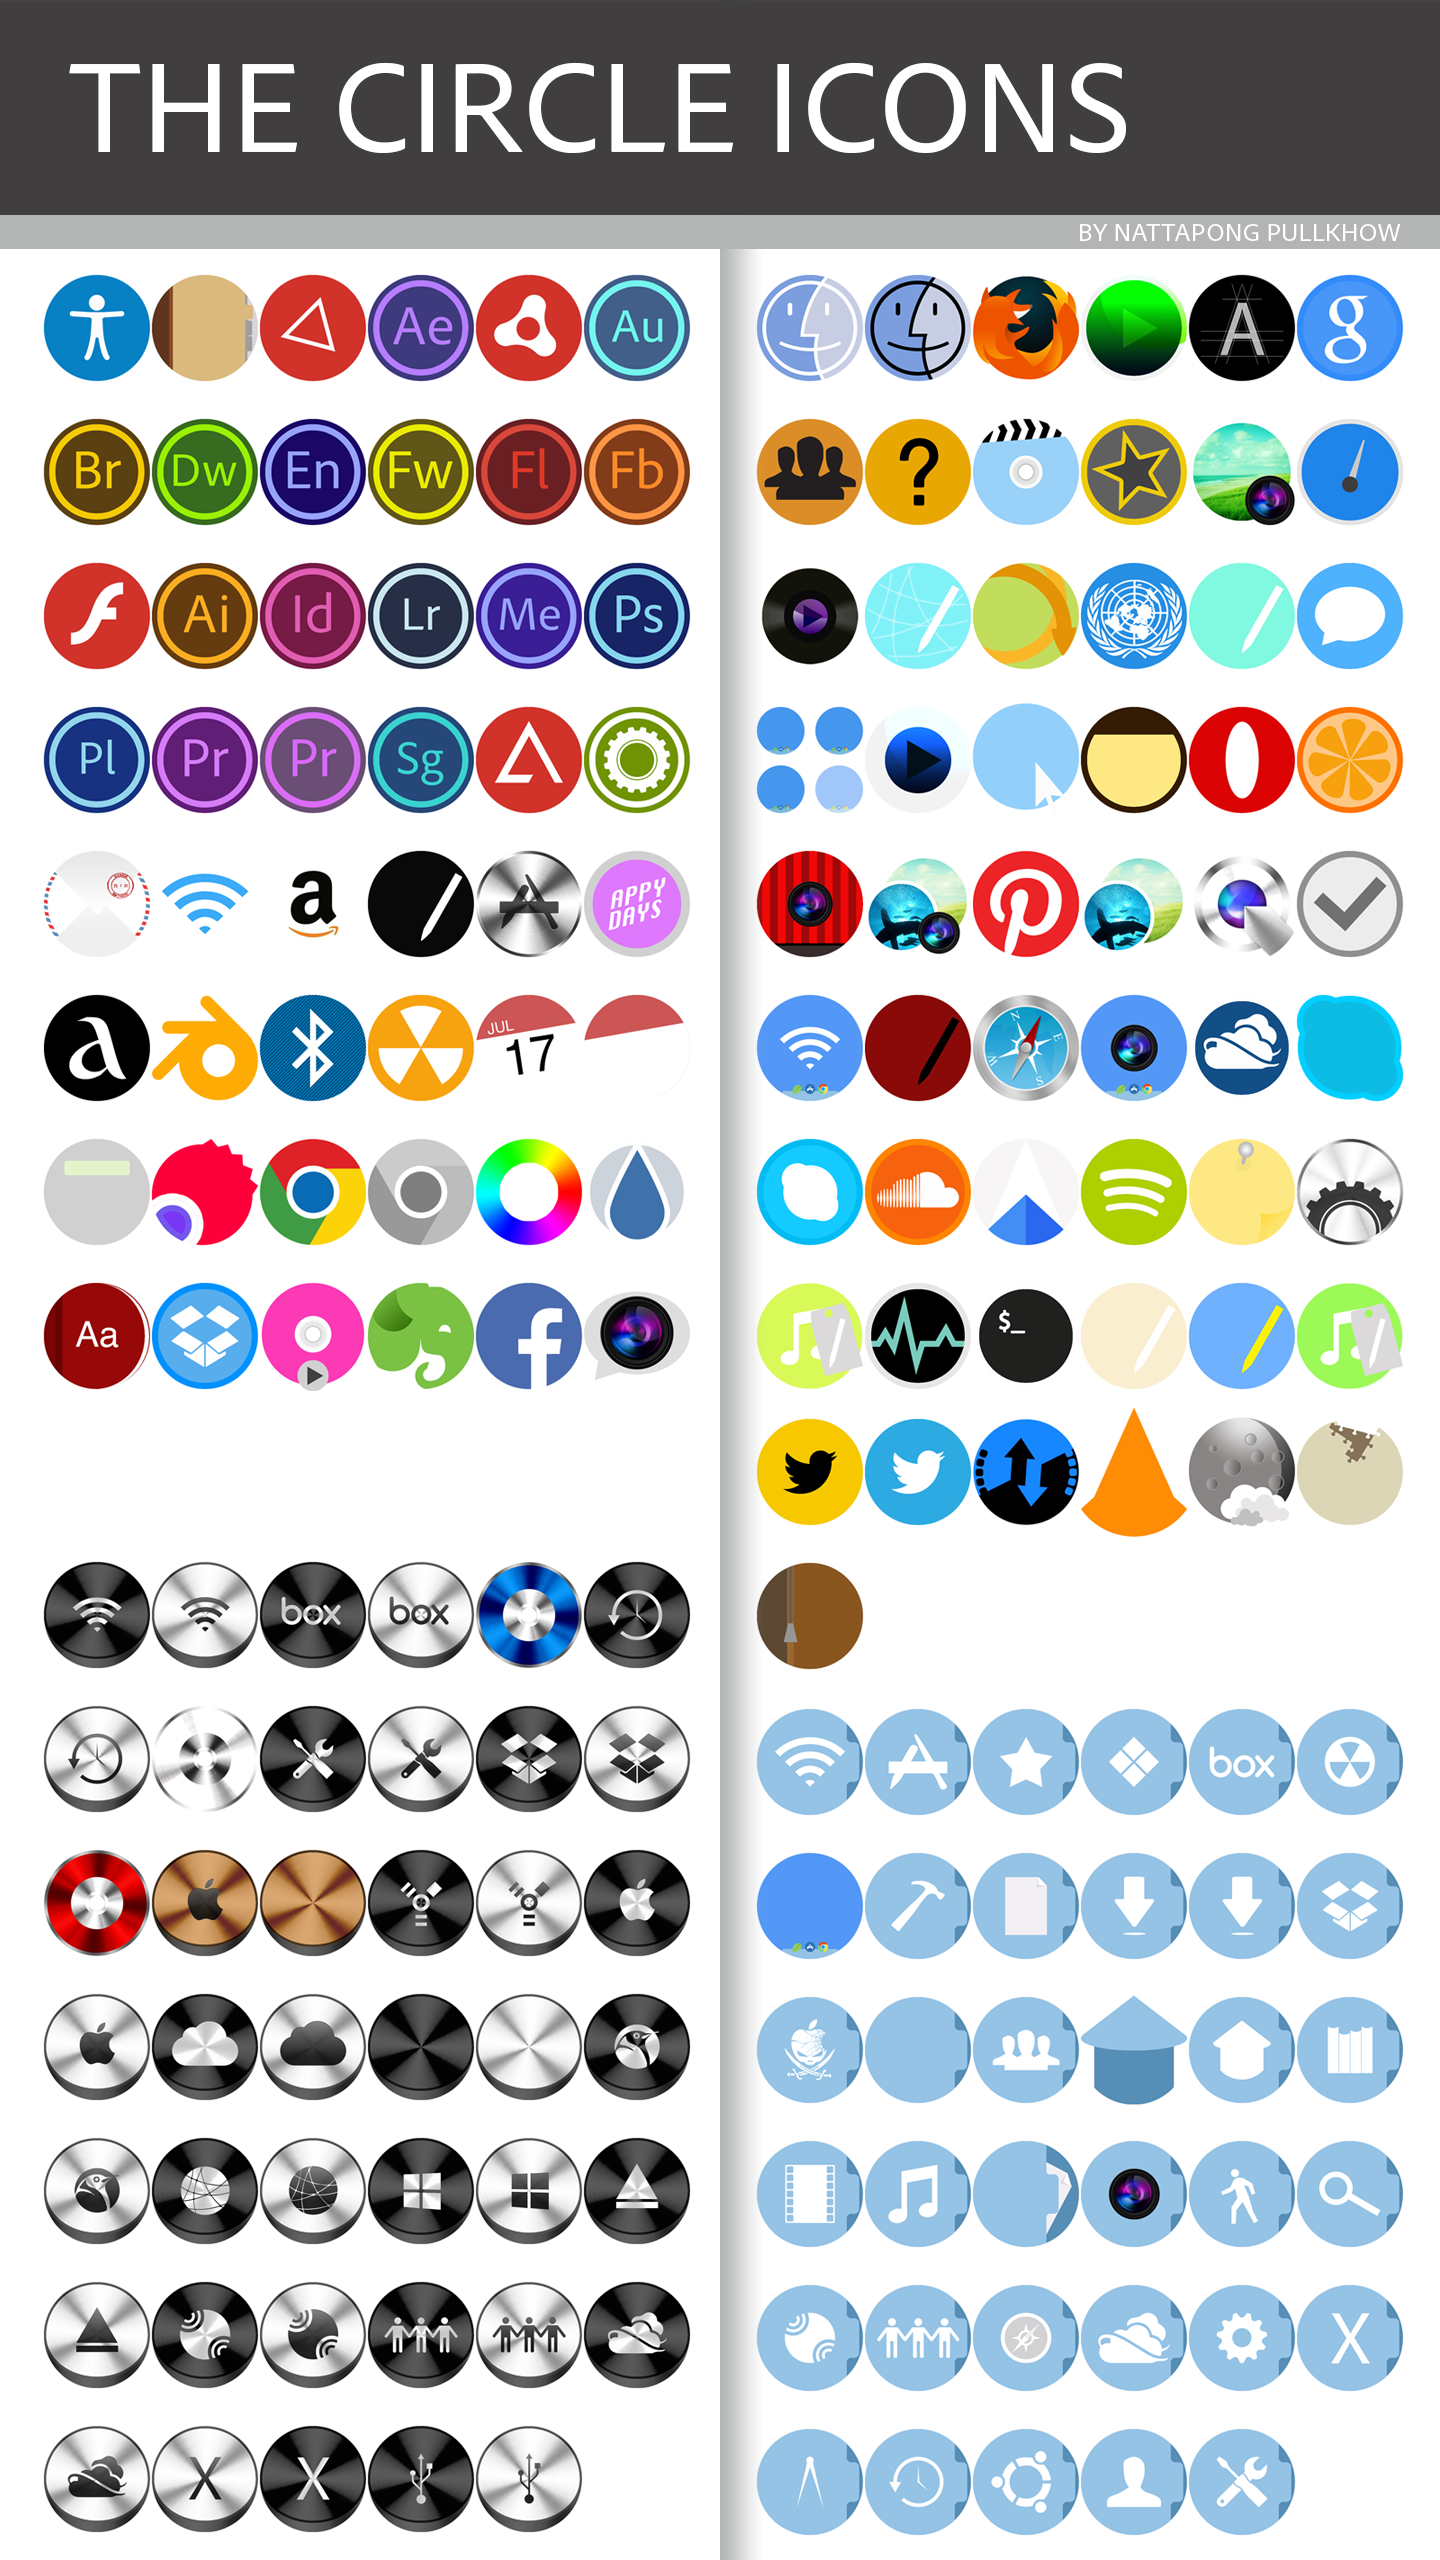 The CIRCLE ICONS